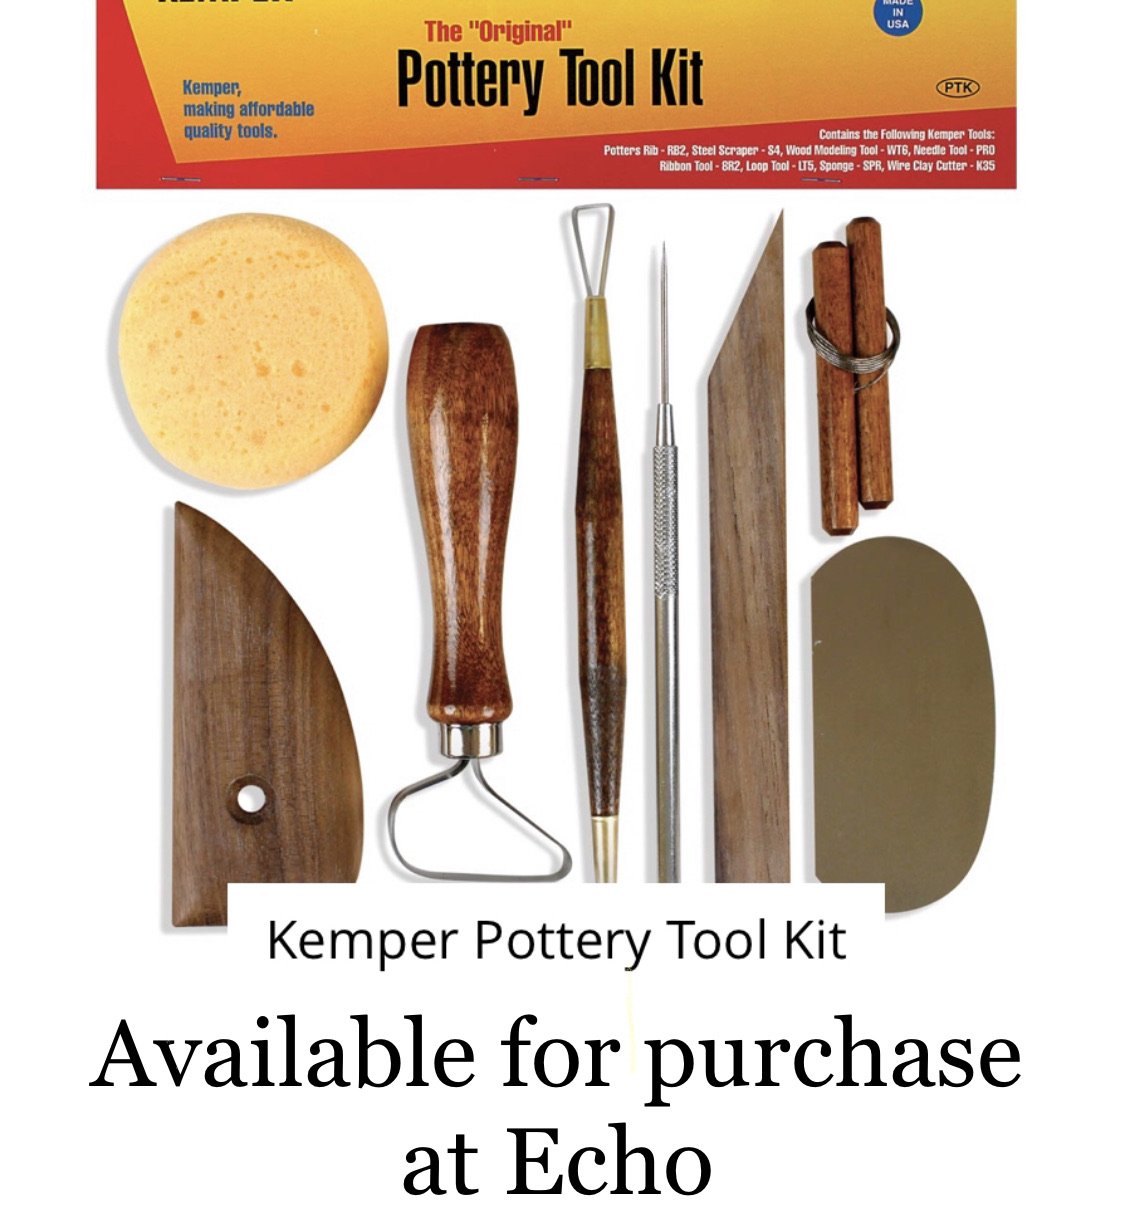 The 10 Best Pottery Tools for Beginners - The Ceramic School